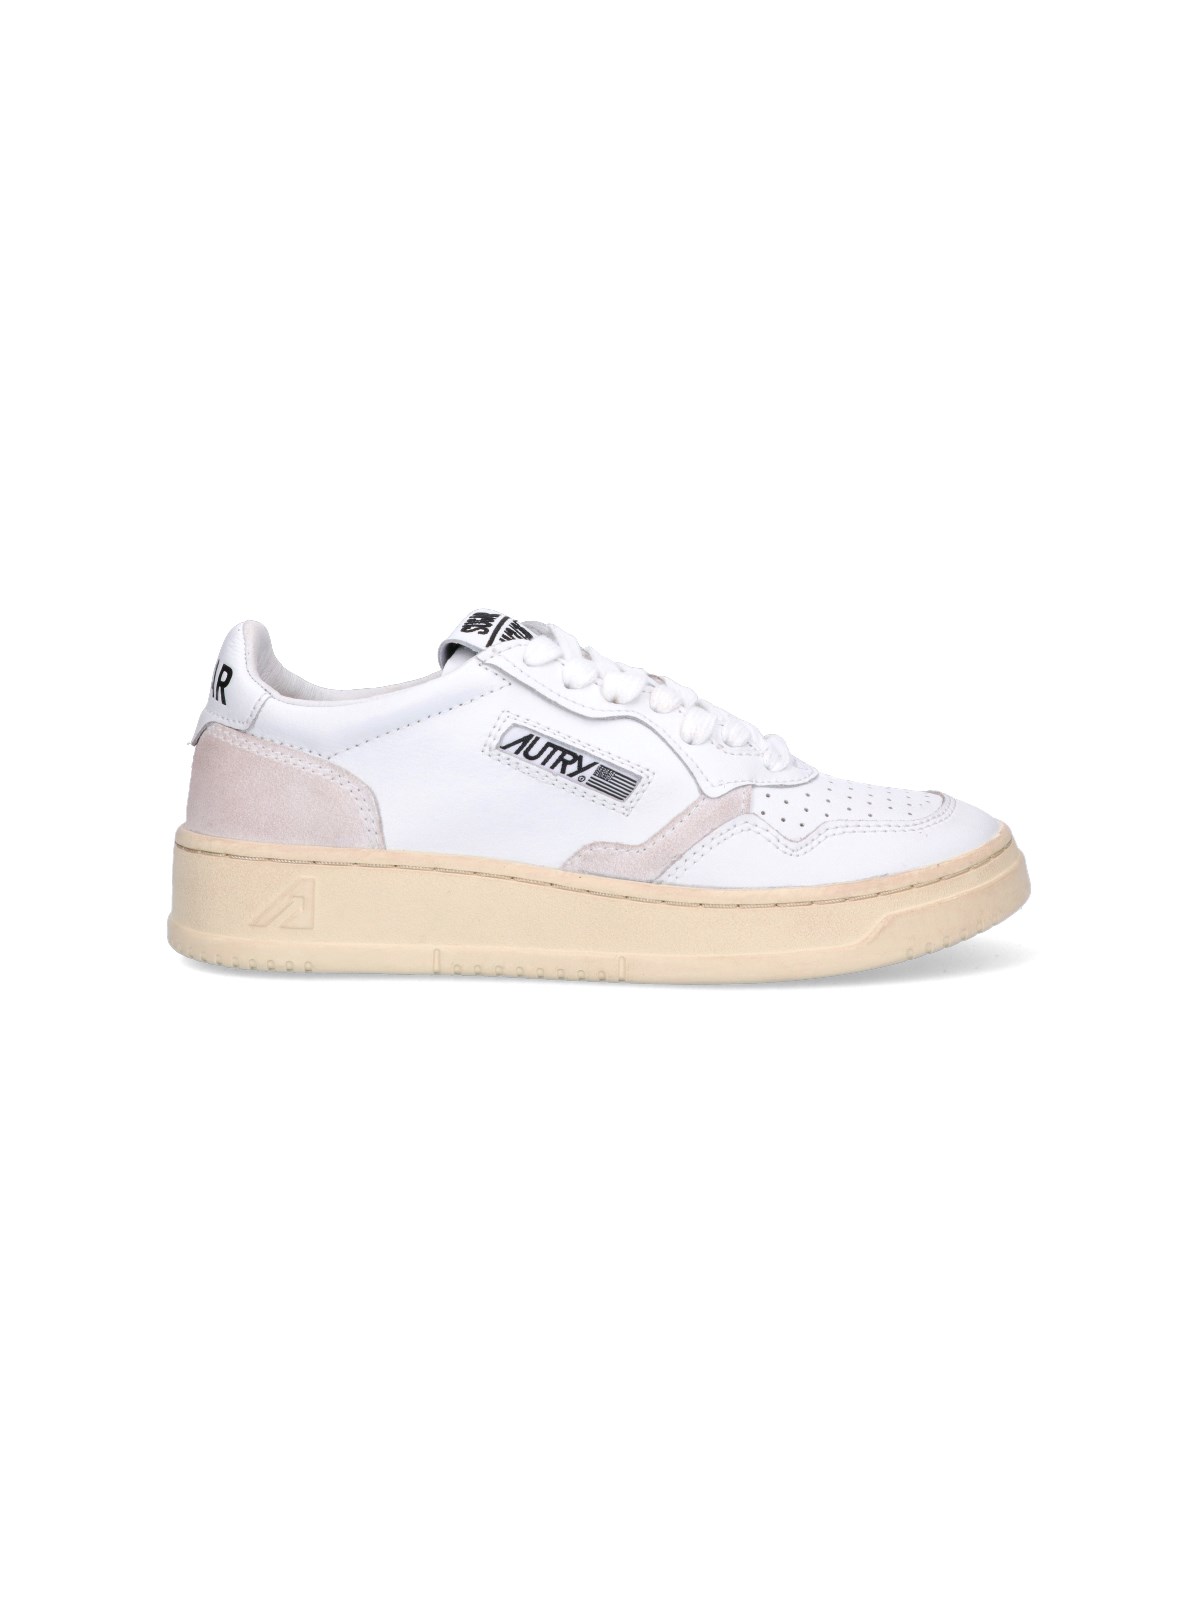 Autry X Sugar "m6" Sneakers In White